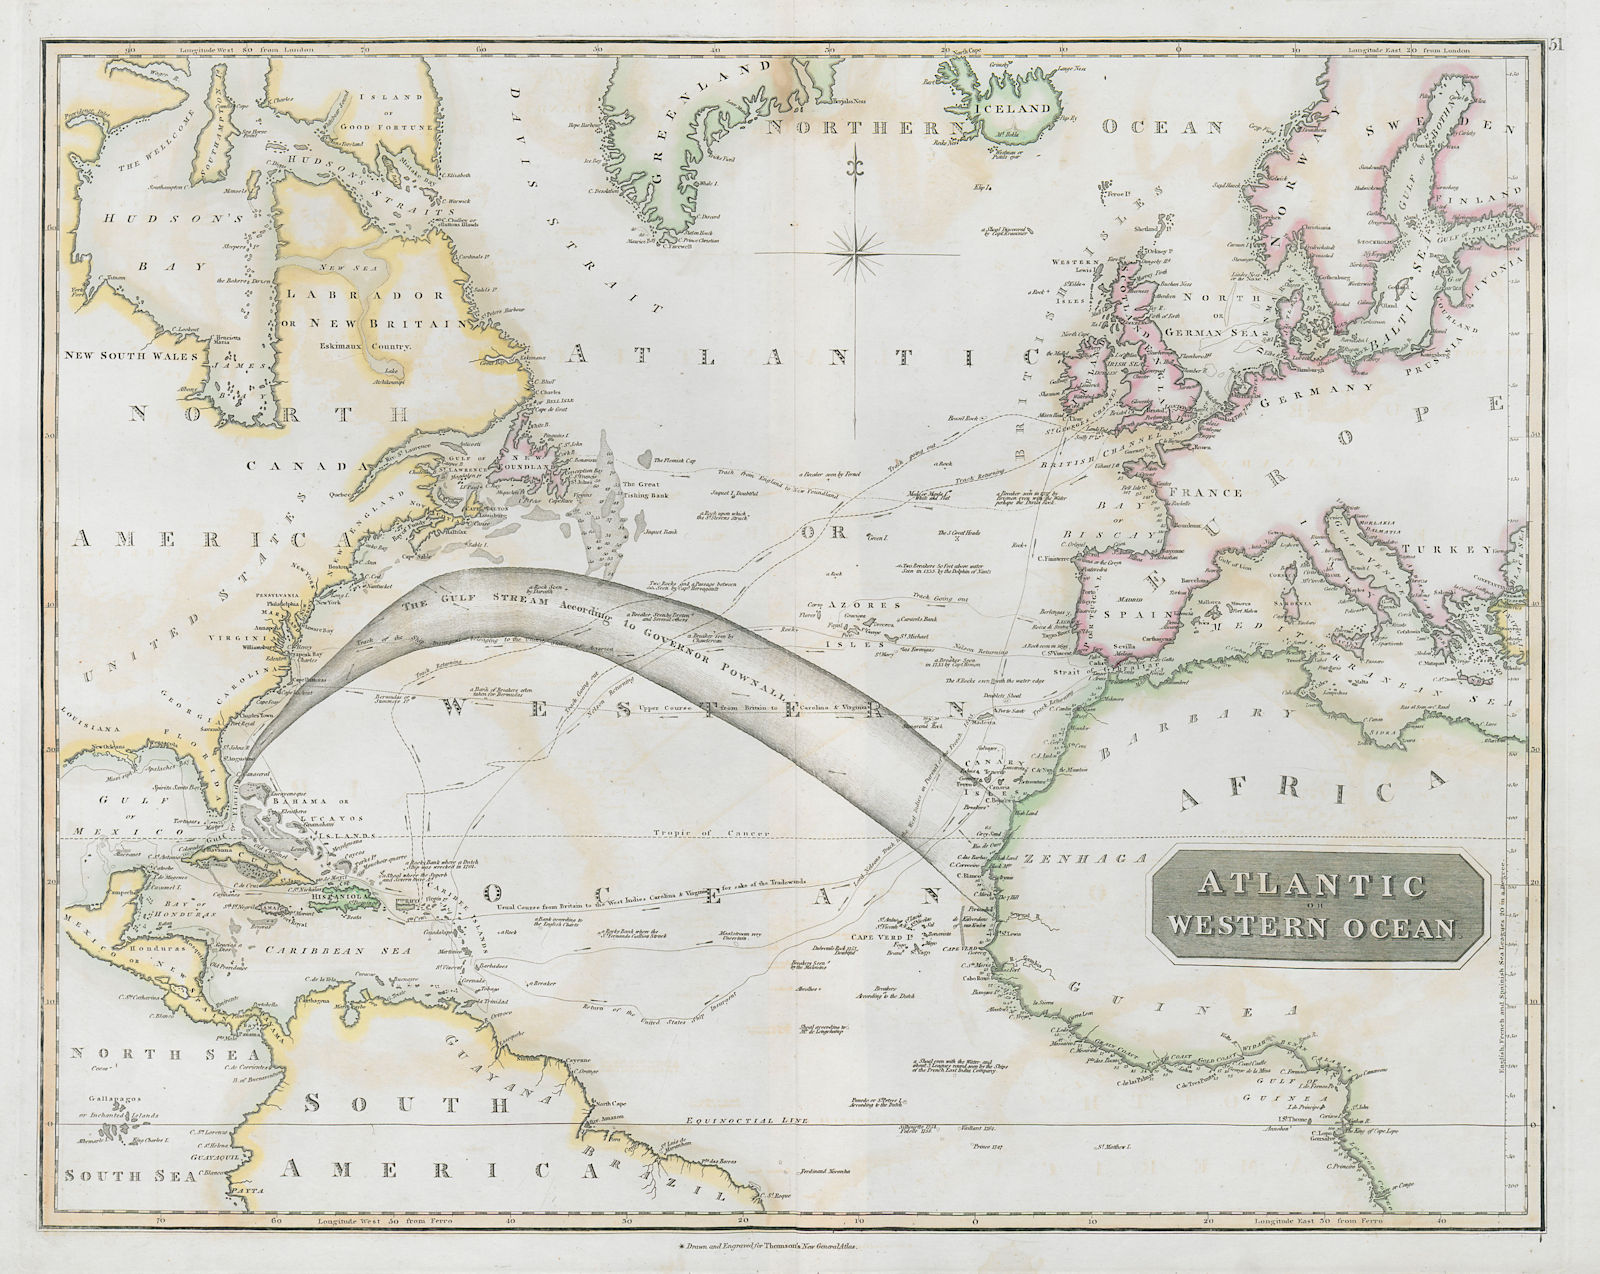 Atlantic or Western Ocean. Gulf Stream, Nelson's & trade routes THOMSON 1830 map